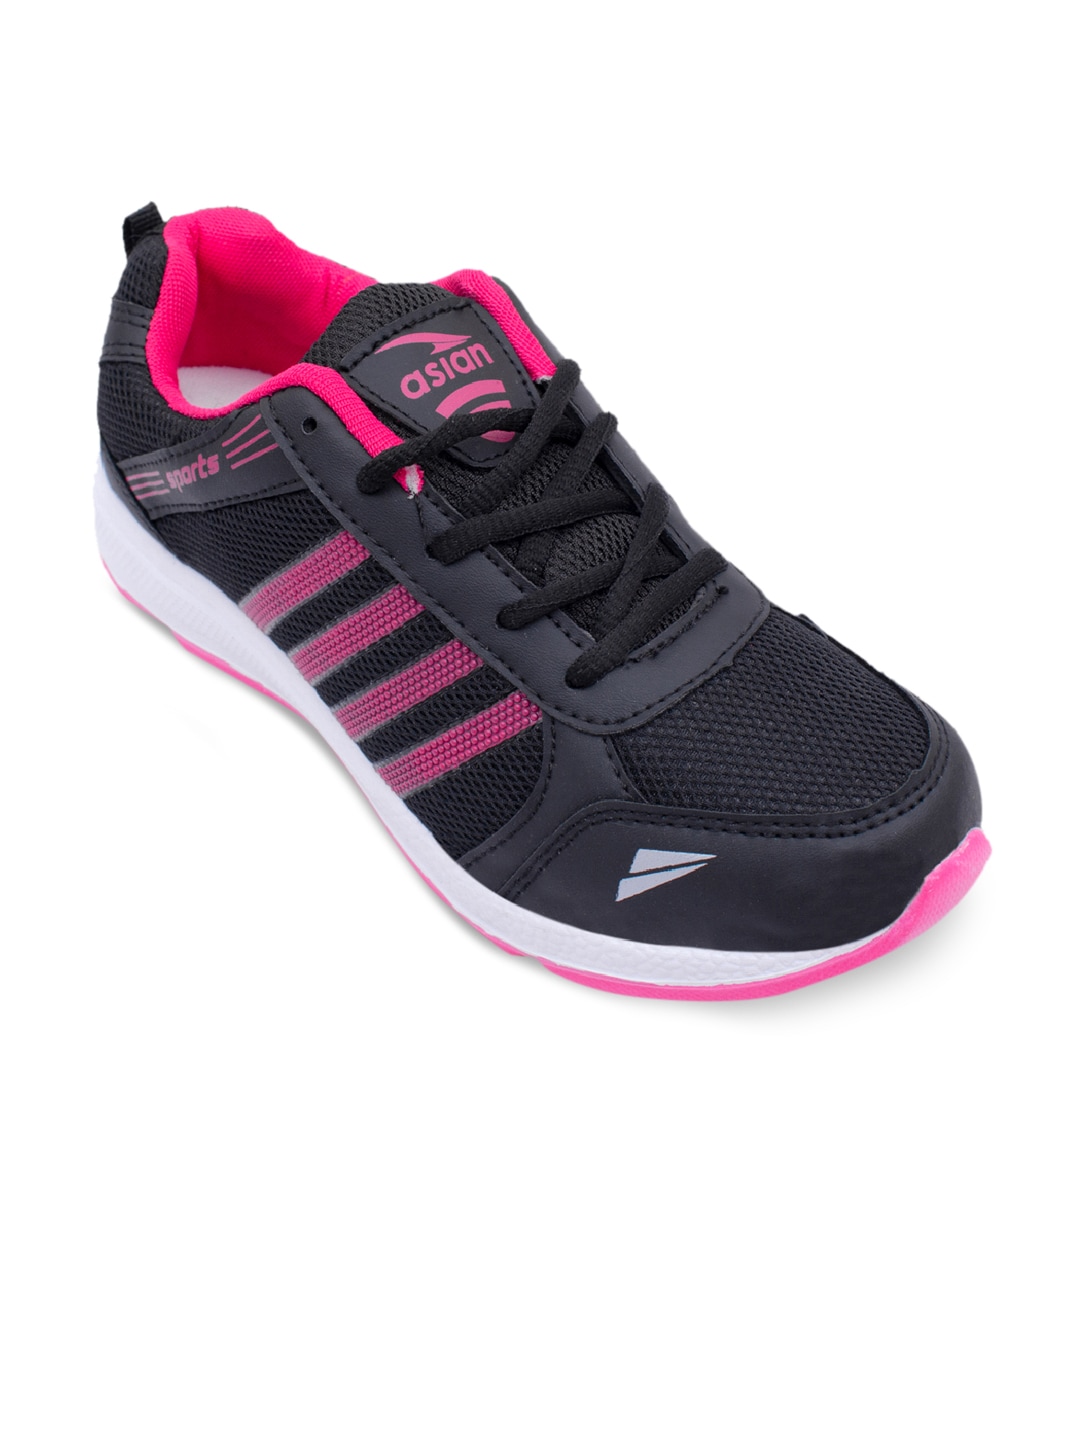 ASIAN Women Black Running Shoes Price in India